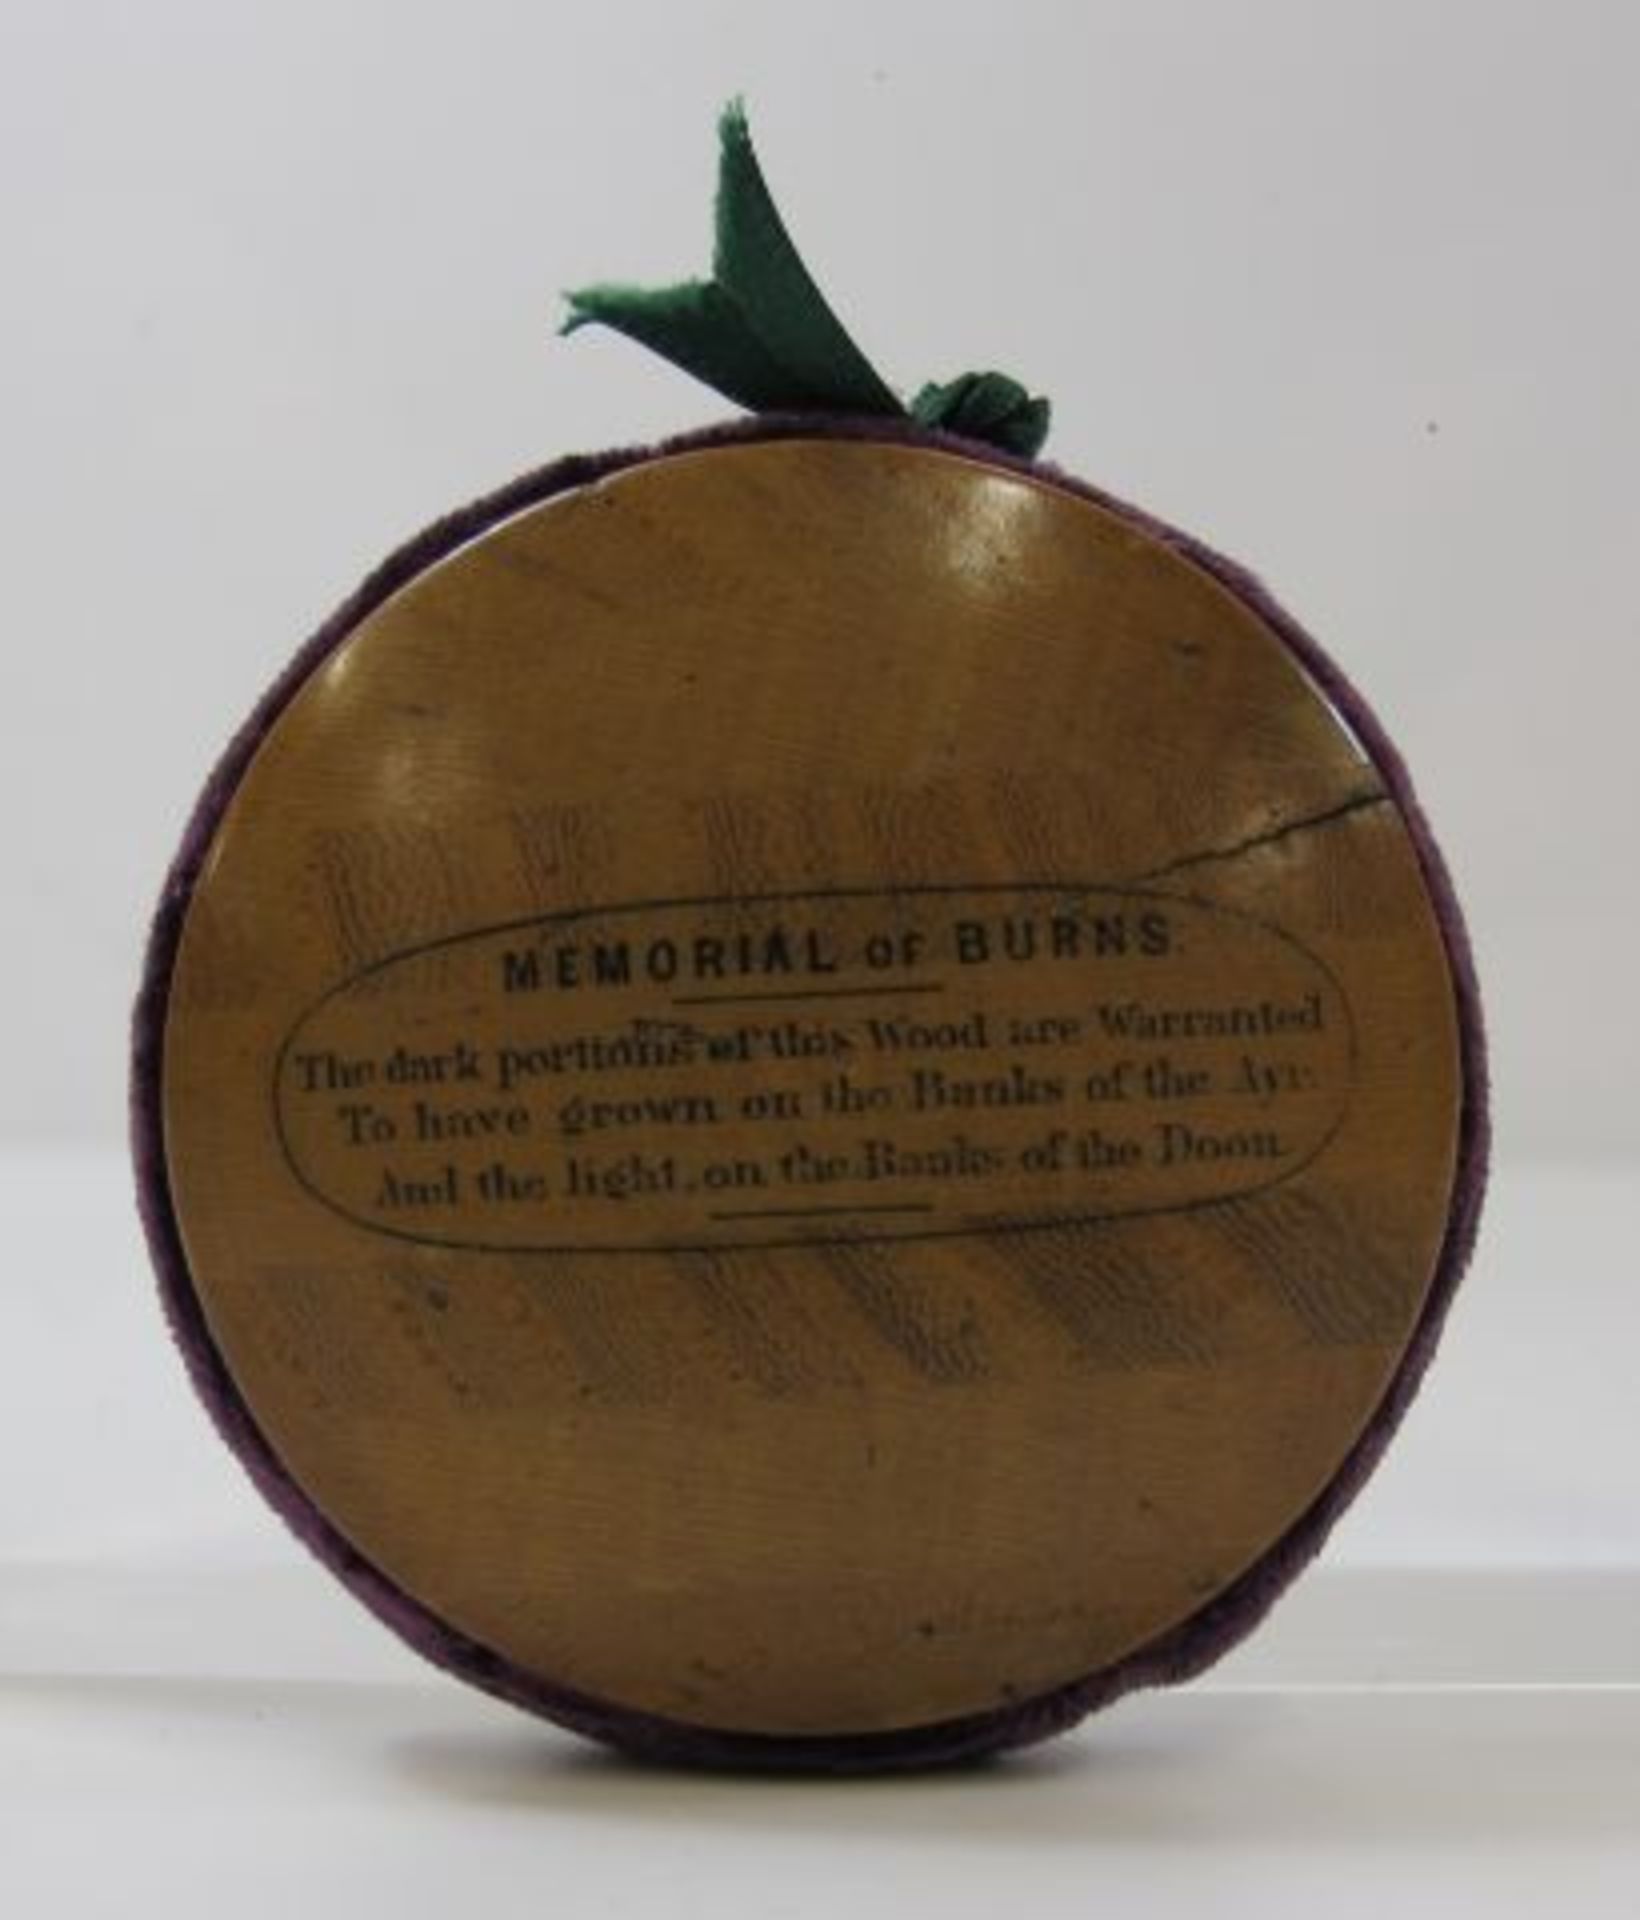 Mauchline Ware (Alloway Kirk) Pin Cushion (est. £20-£40) - Image 2 of 2